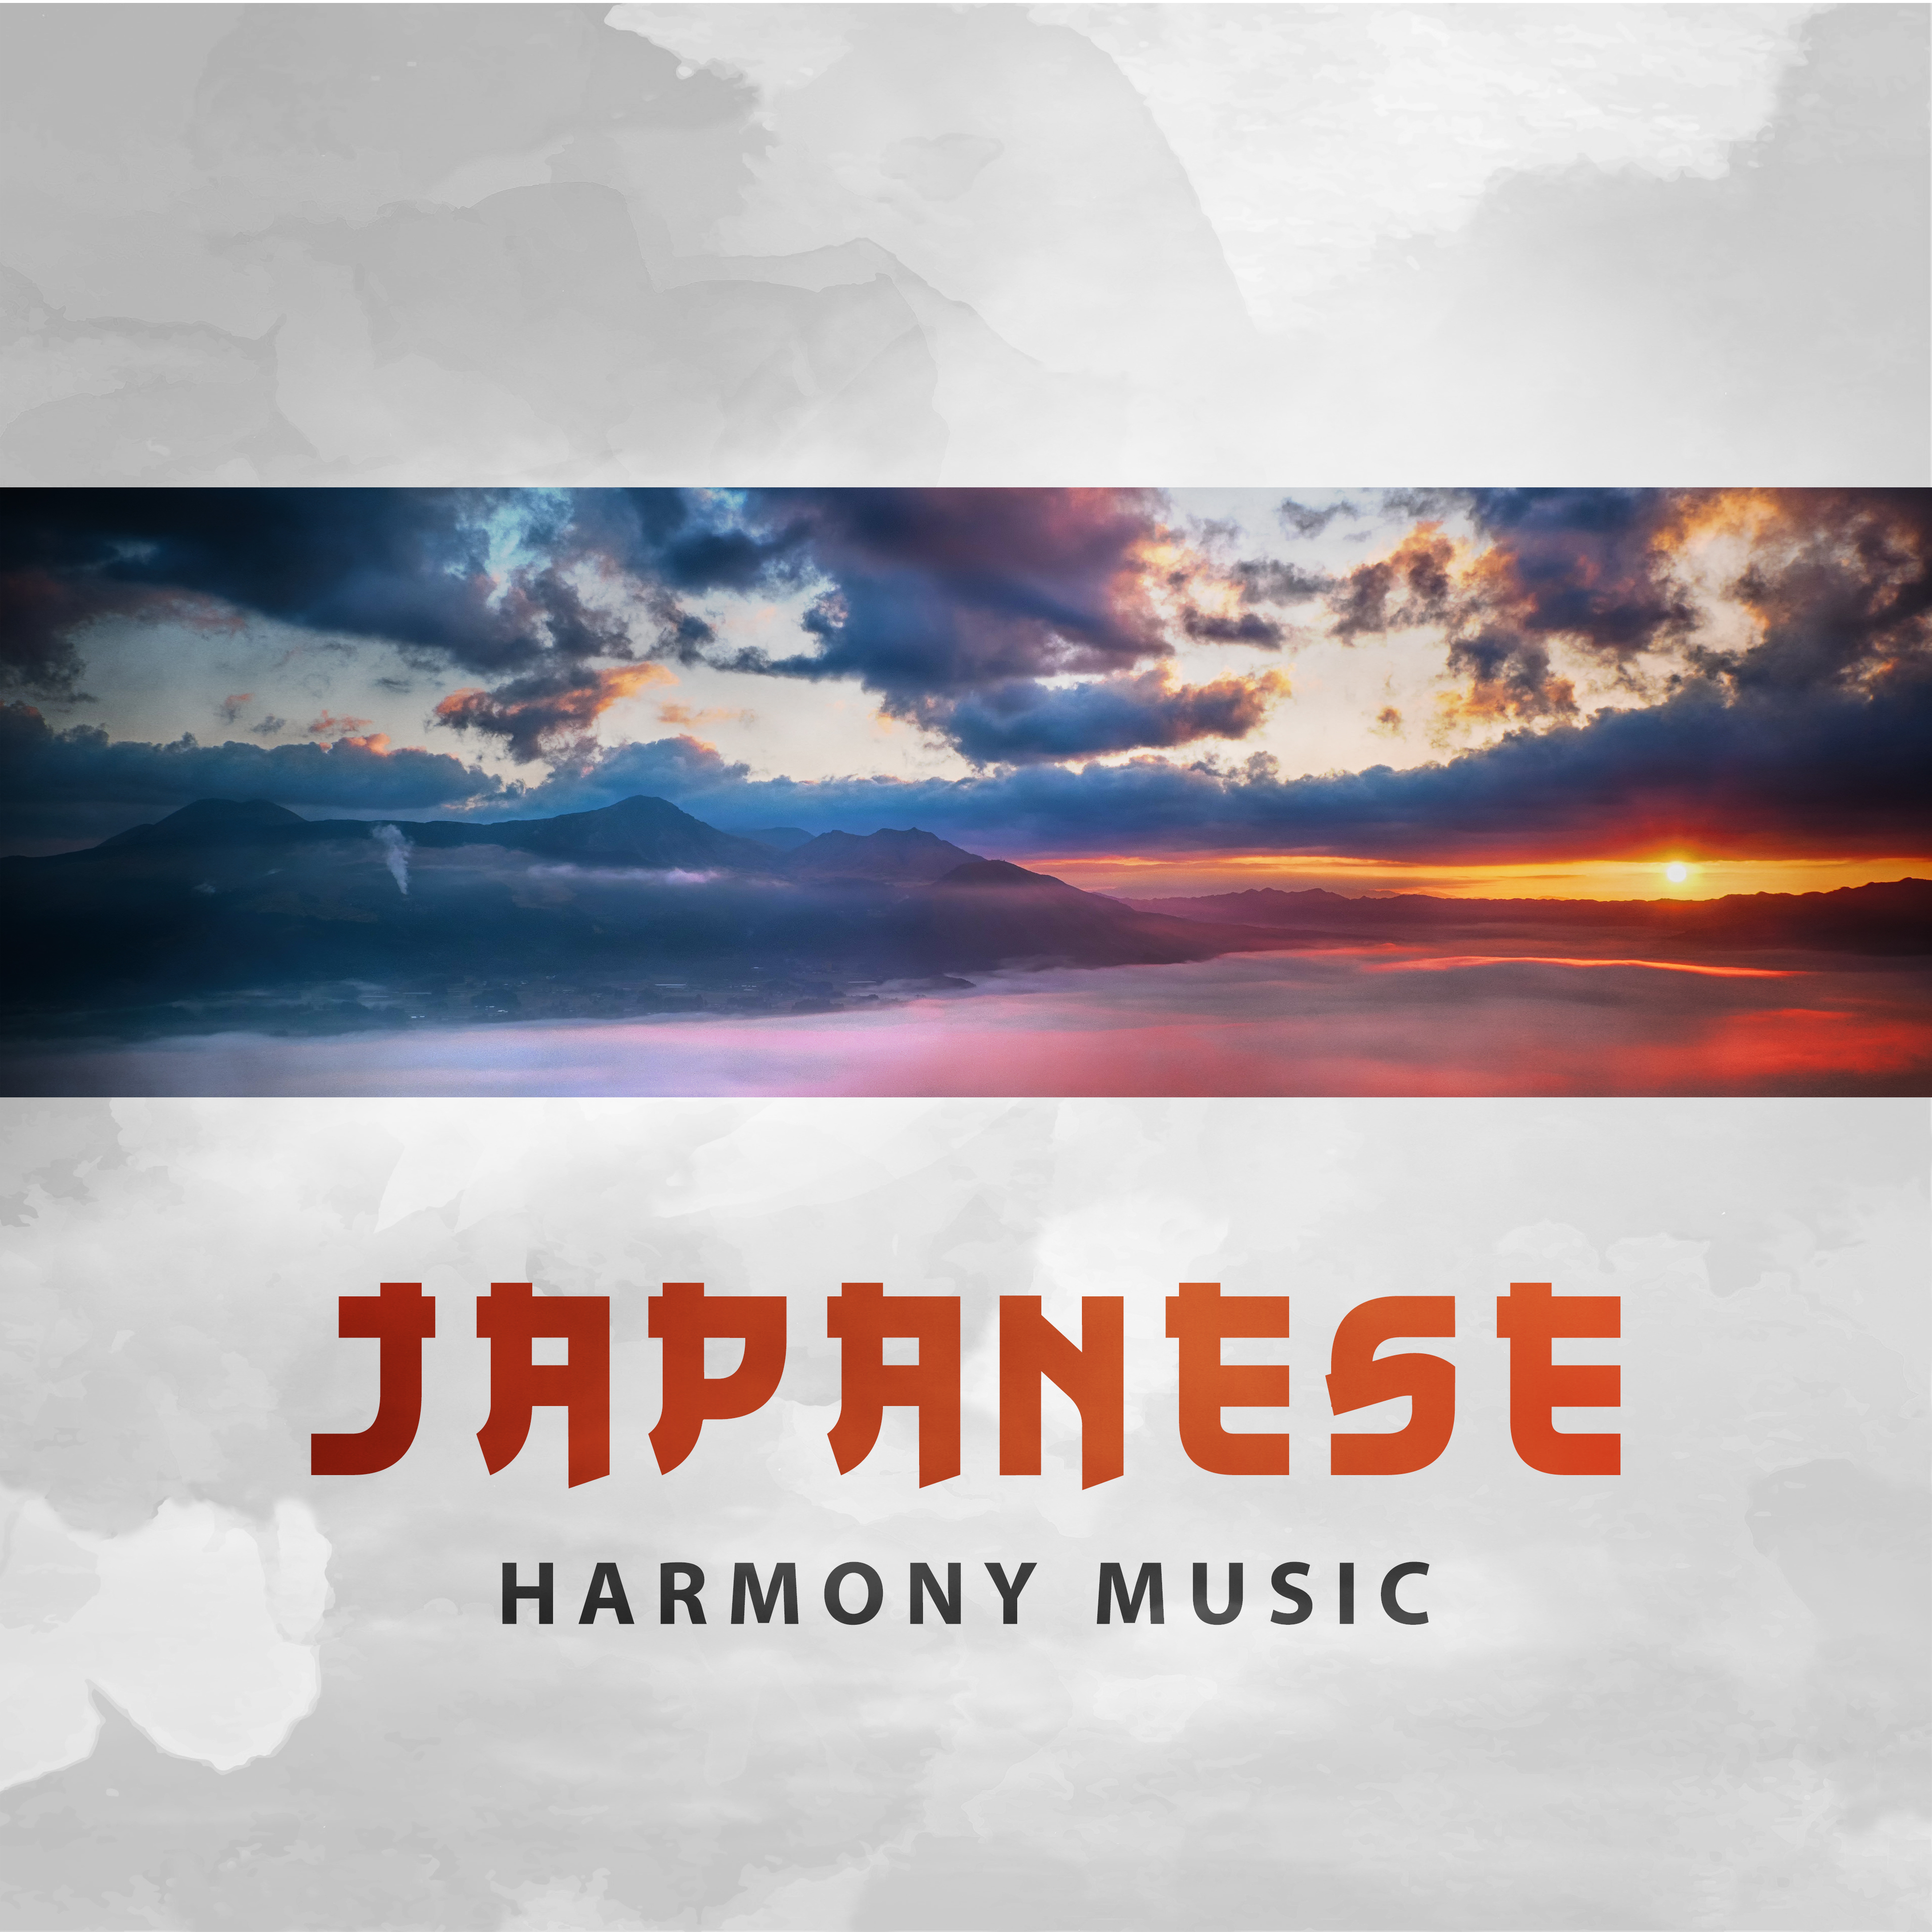 Japanese Harmony Music  Relaxing Music, Zen, Deep Meditation, Healing New Age, Pure Sounds of Nature